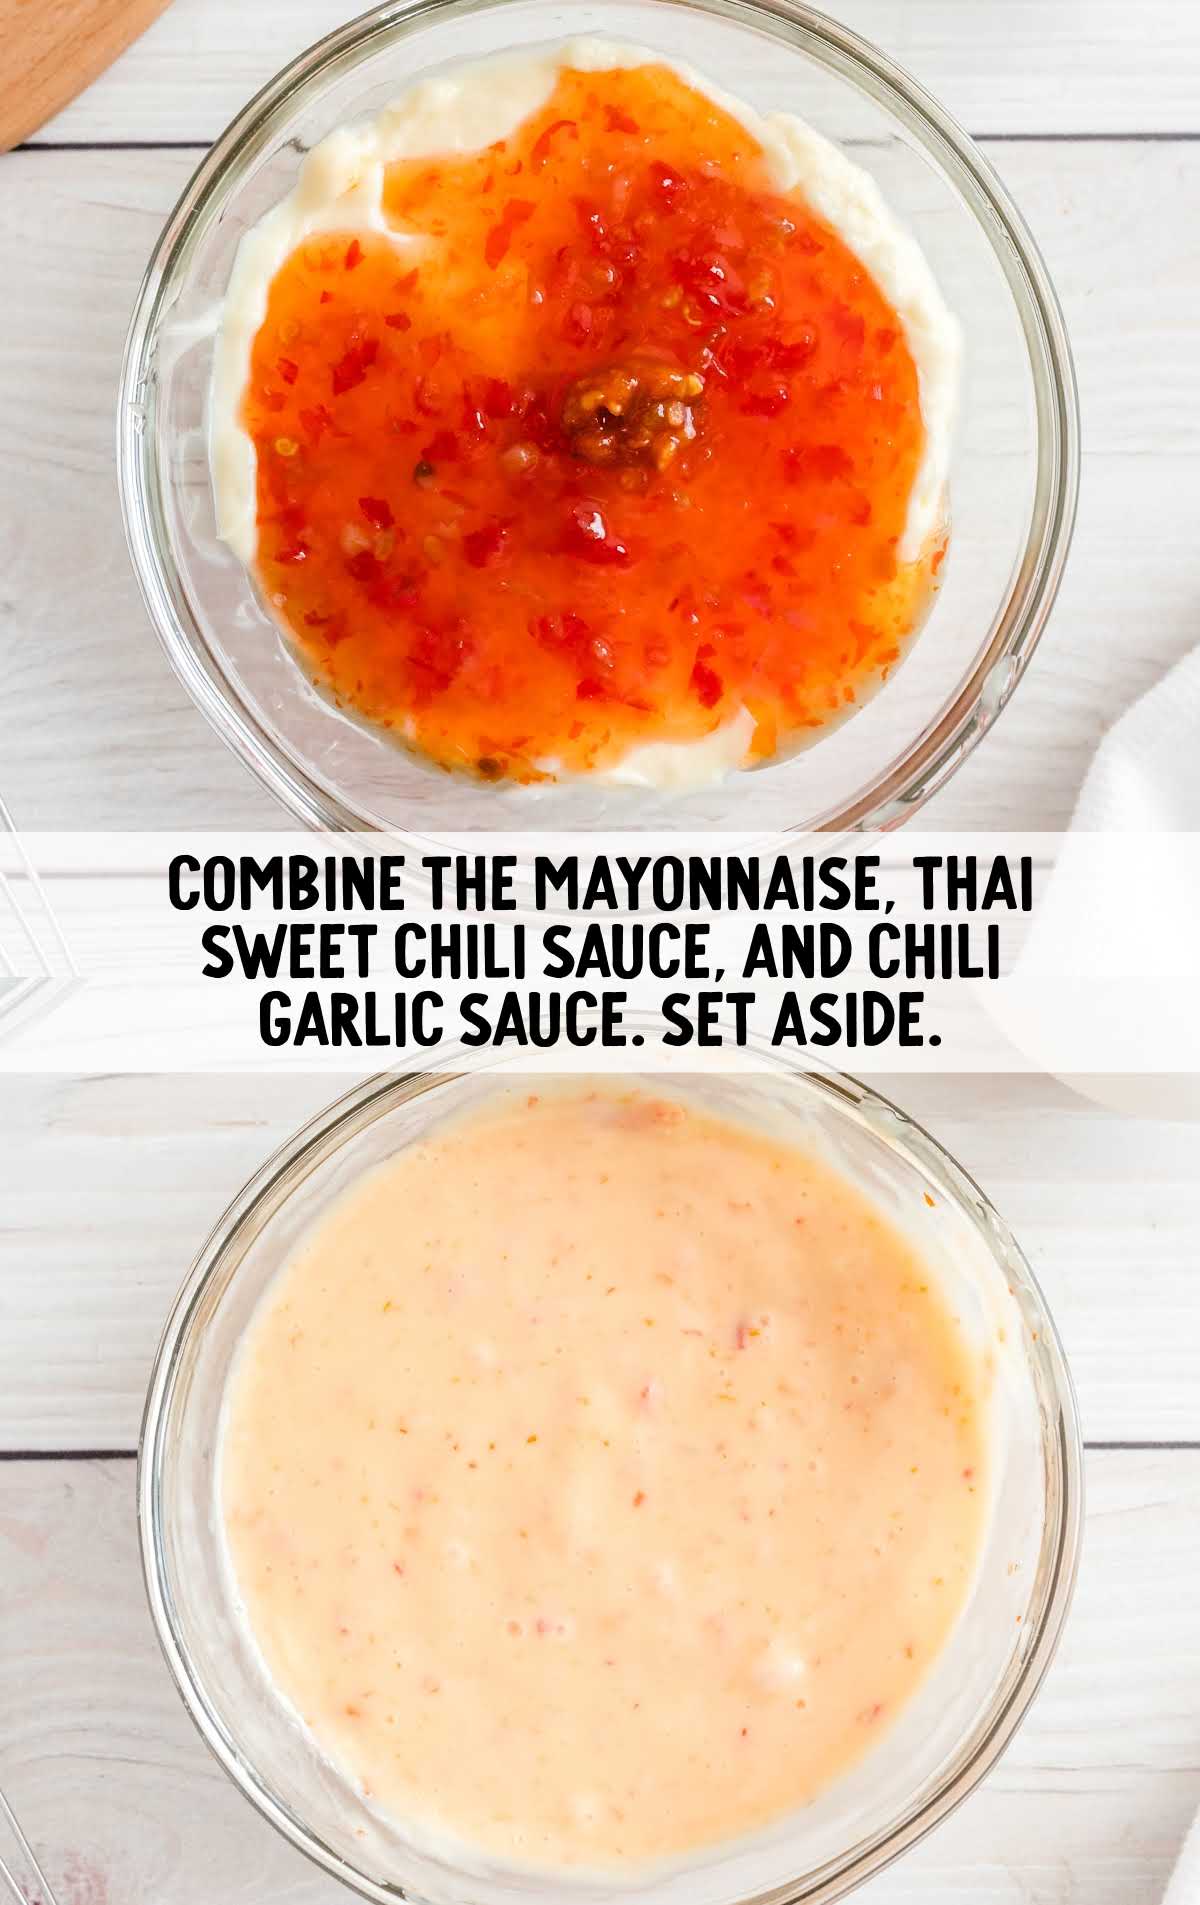 mayonnaise, Thai sweet chili sauce, and chili garlic sauce whisked in a bowl